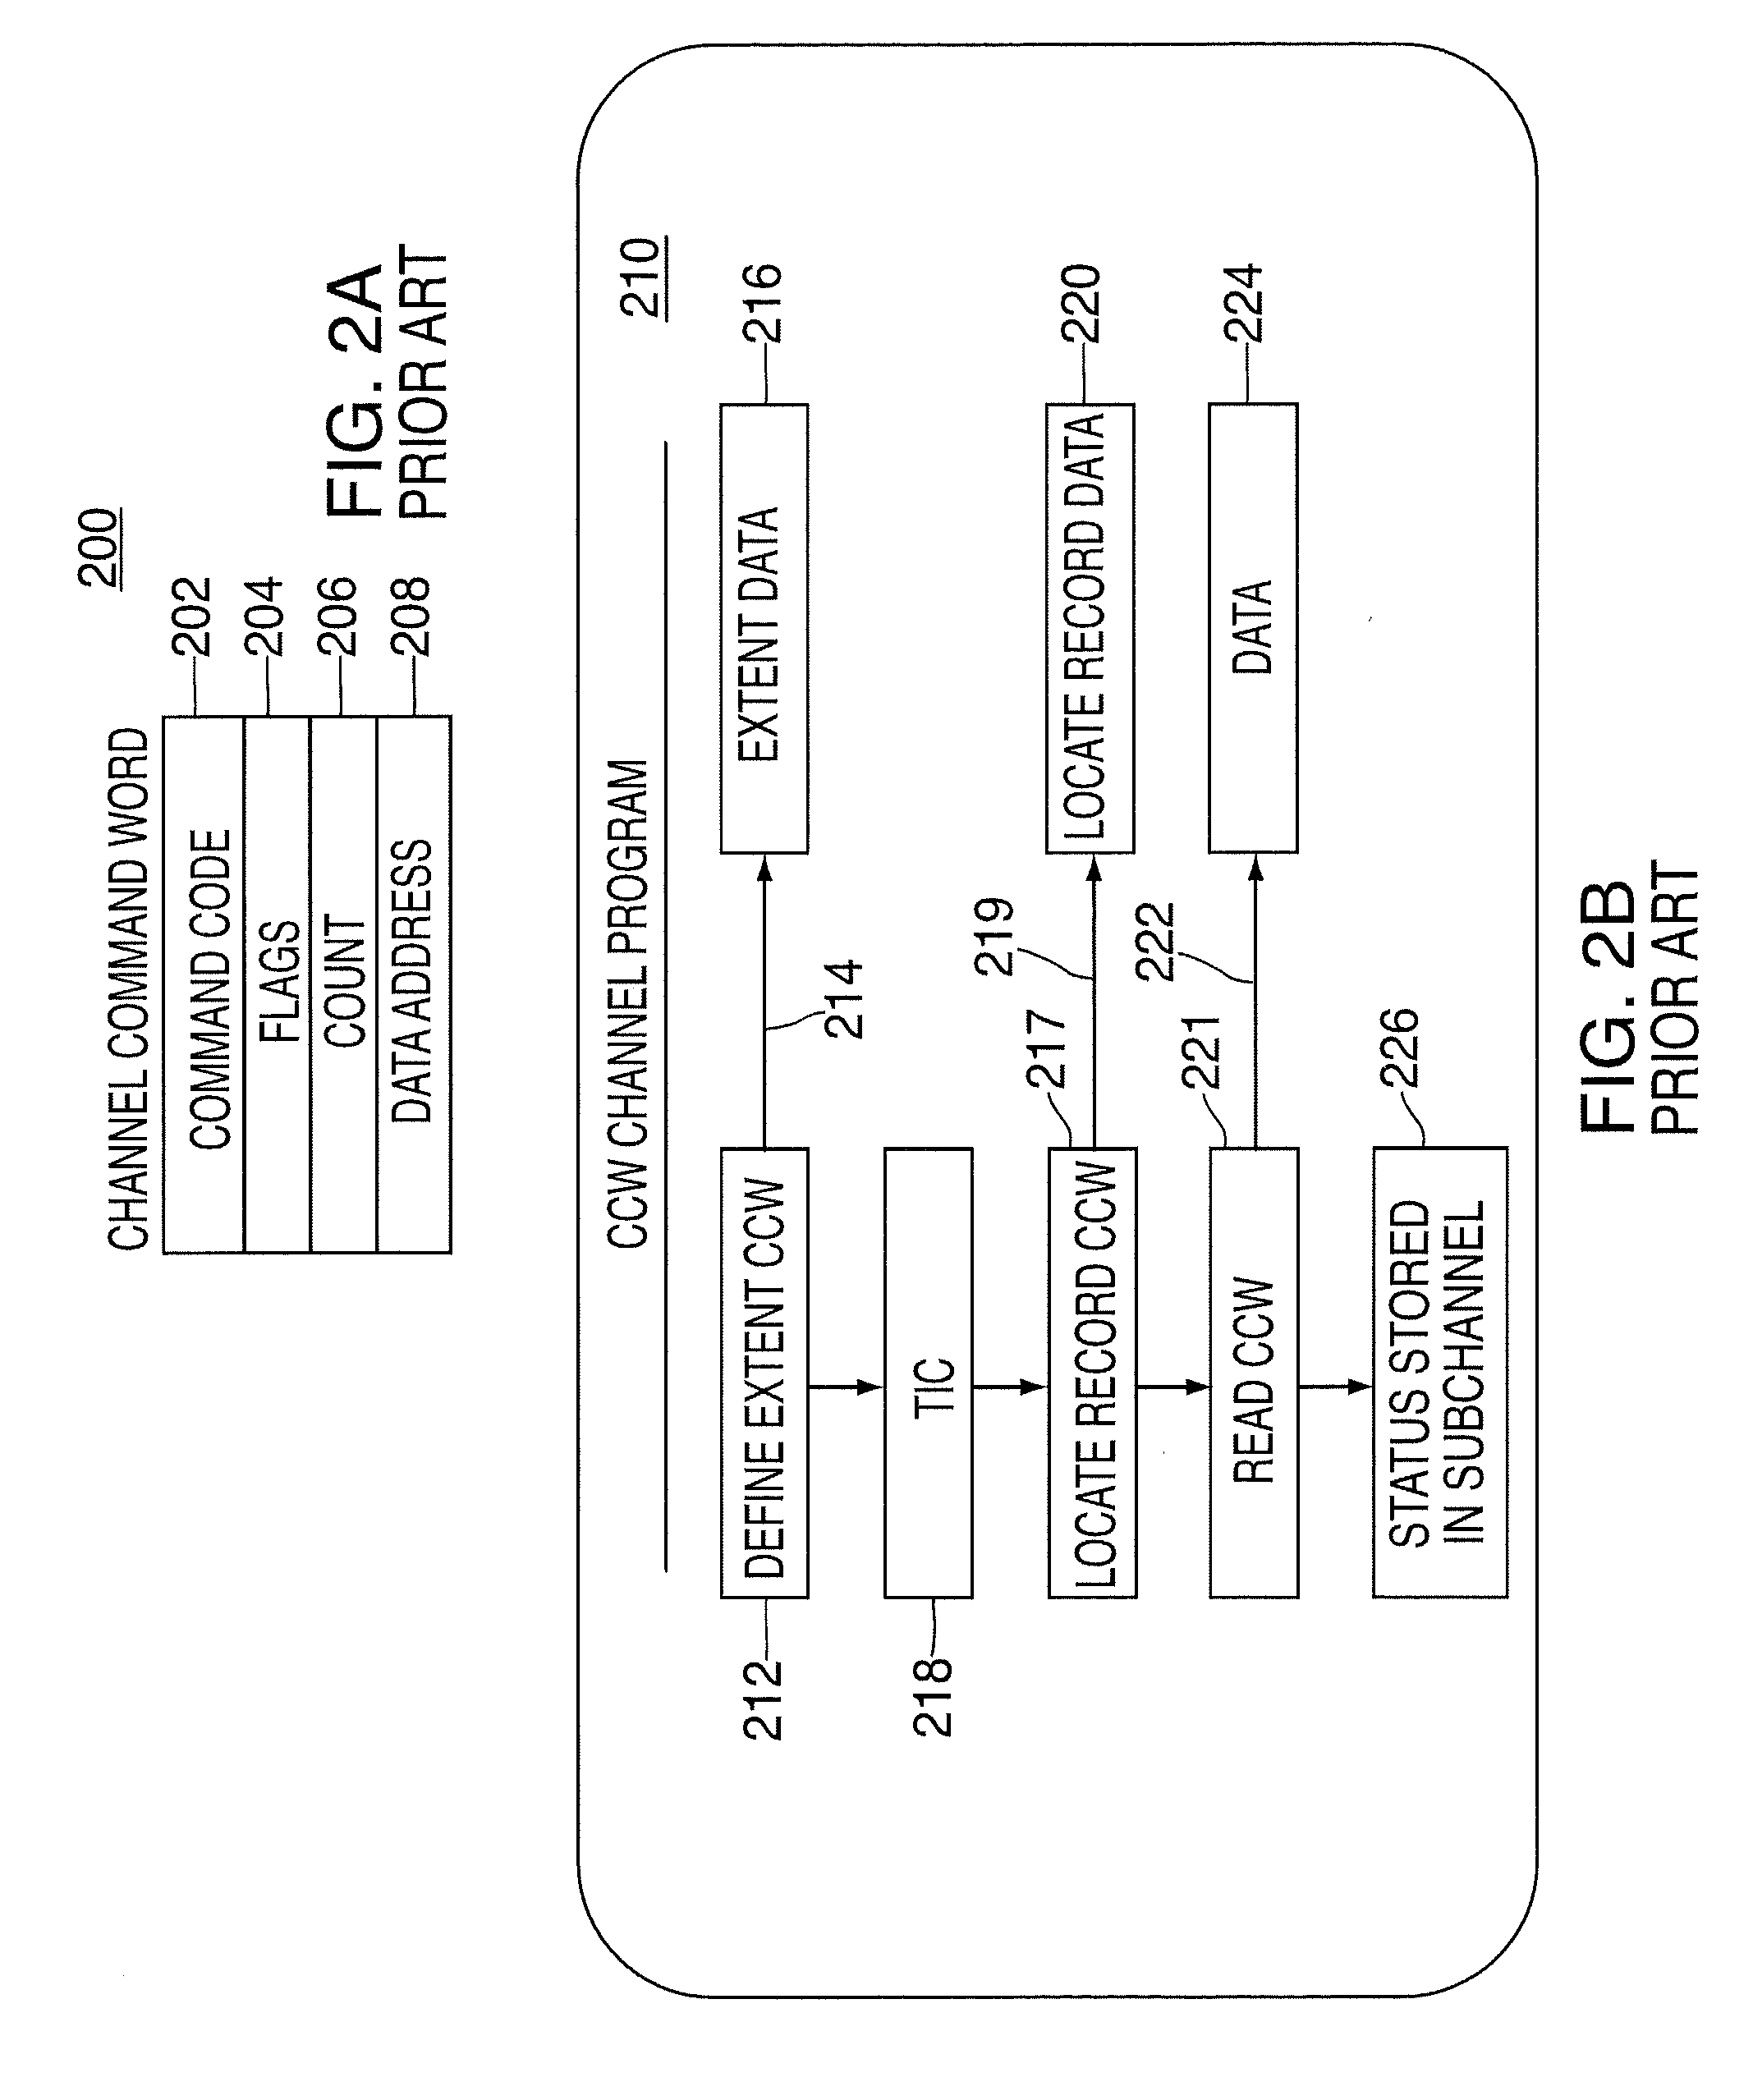 Processing of data to perform system changes in an input/output processing system